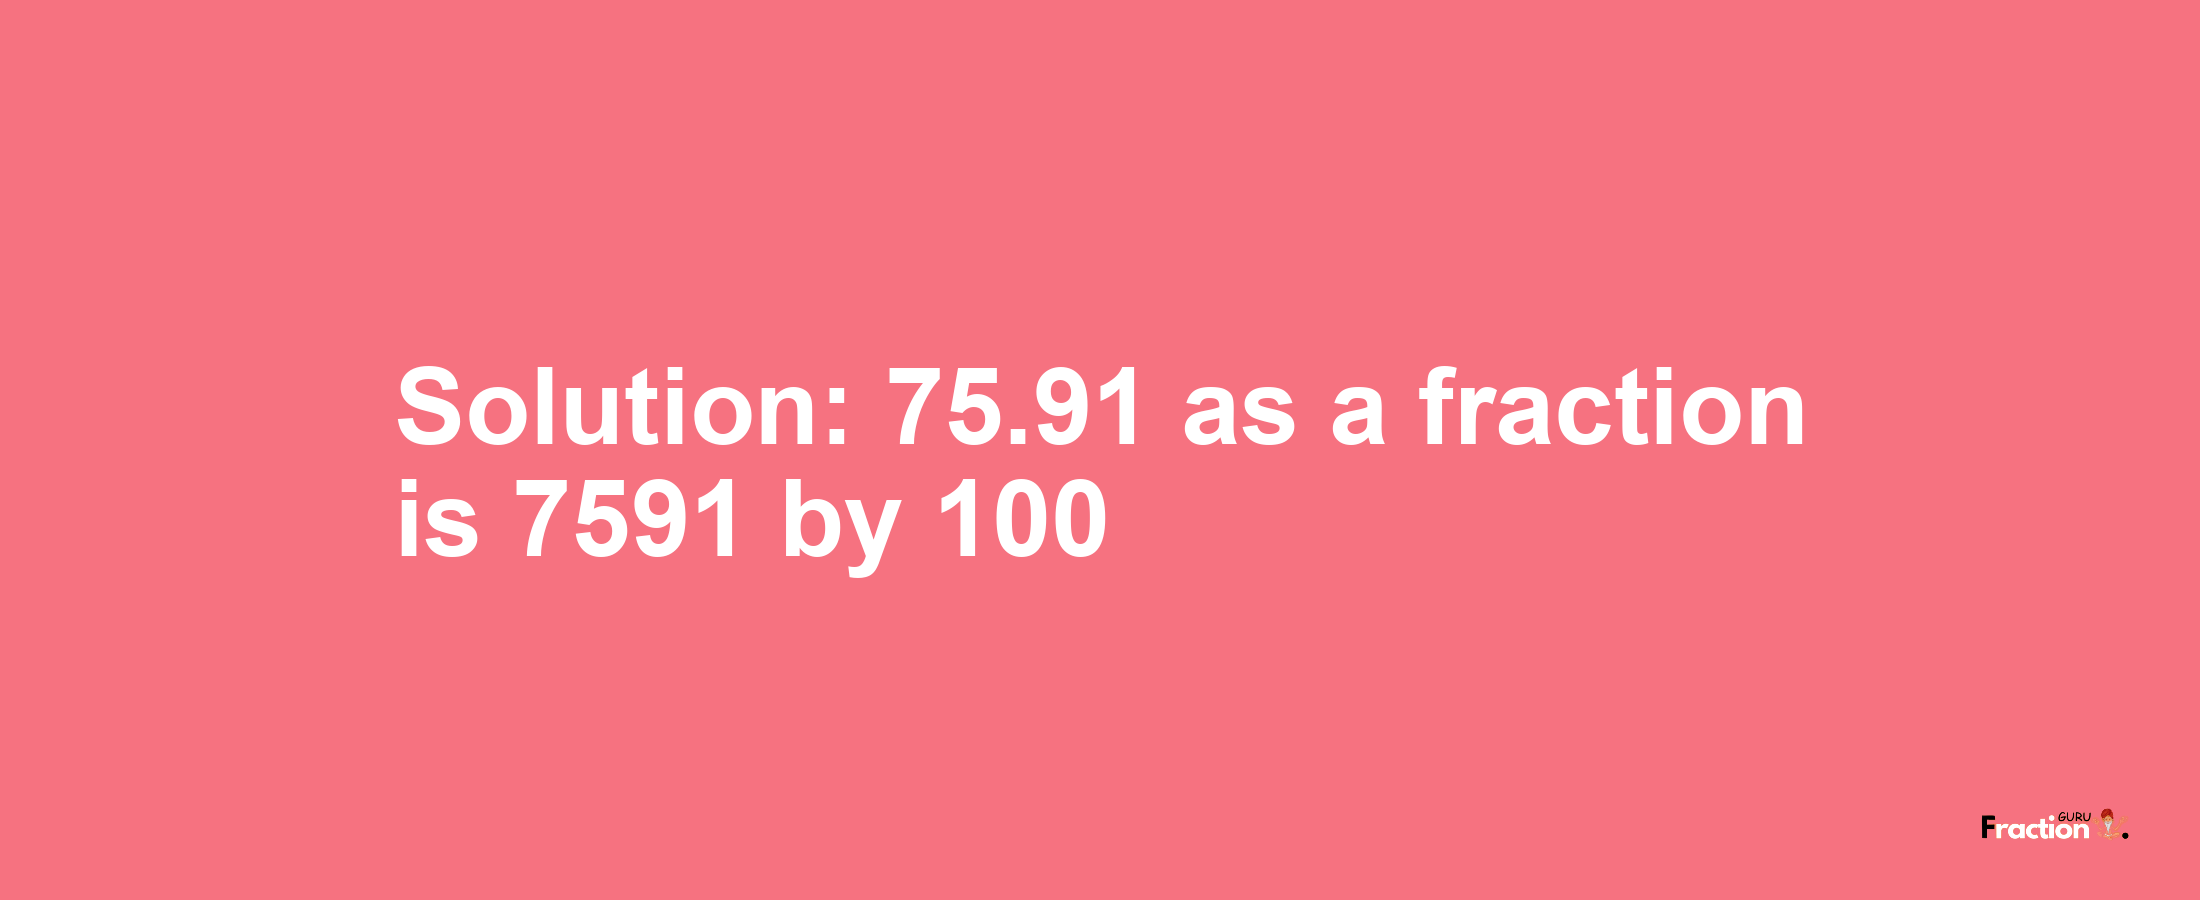 Solution:75.91 as a fraction is 7591/100